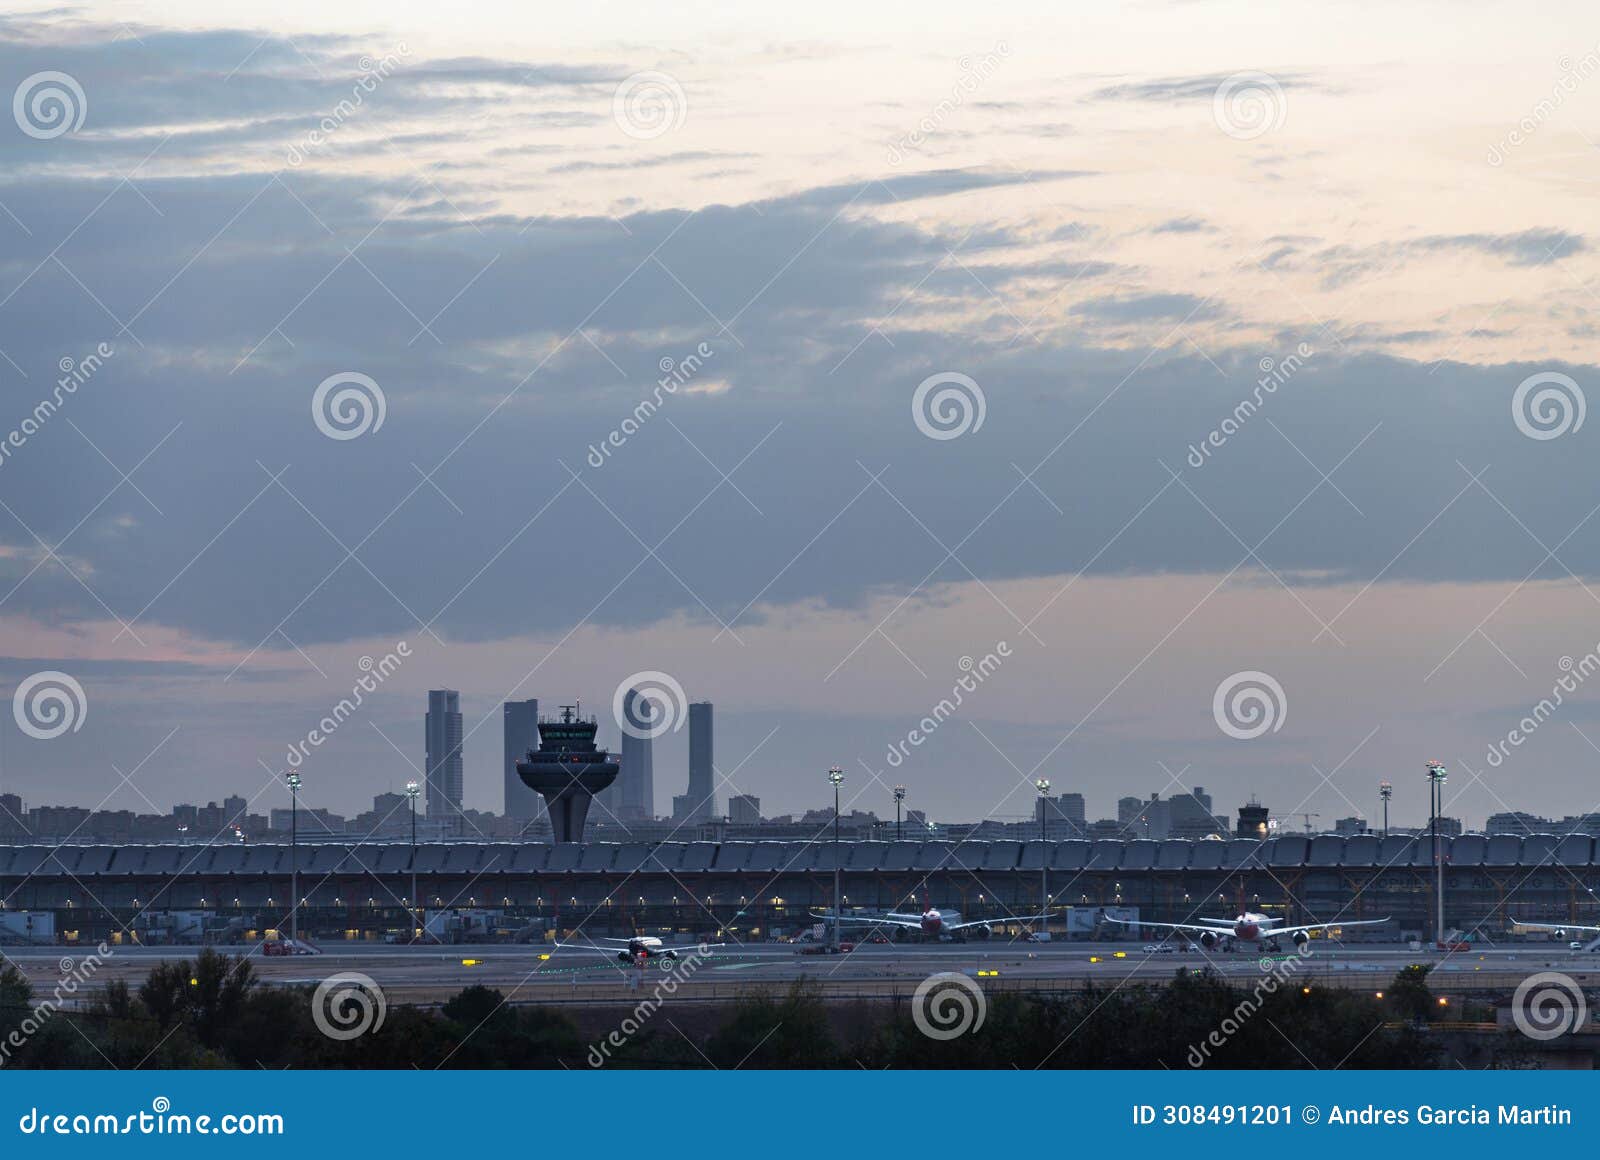 madrid barajas airport and city skyline